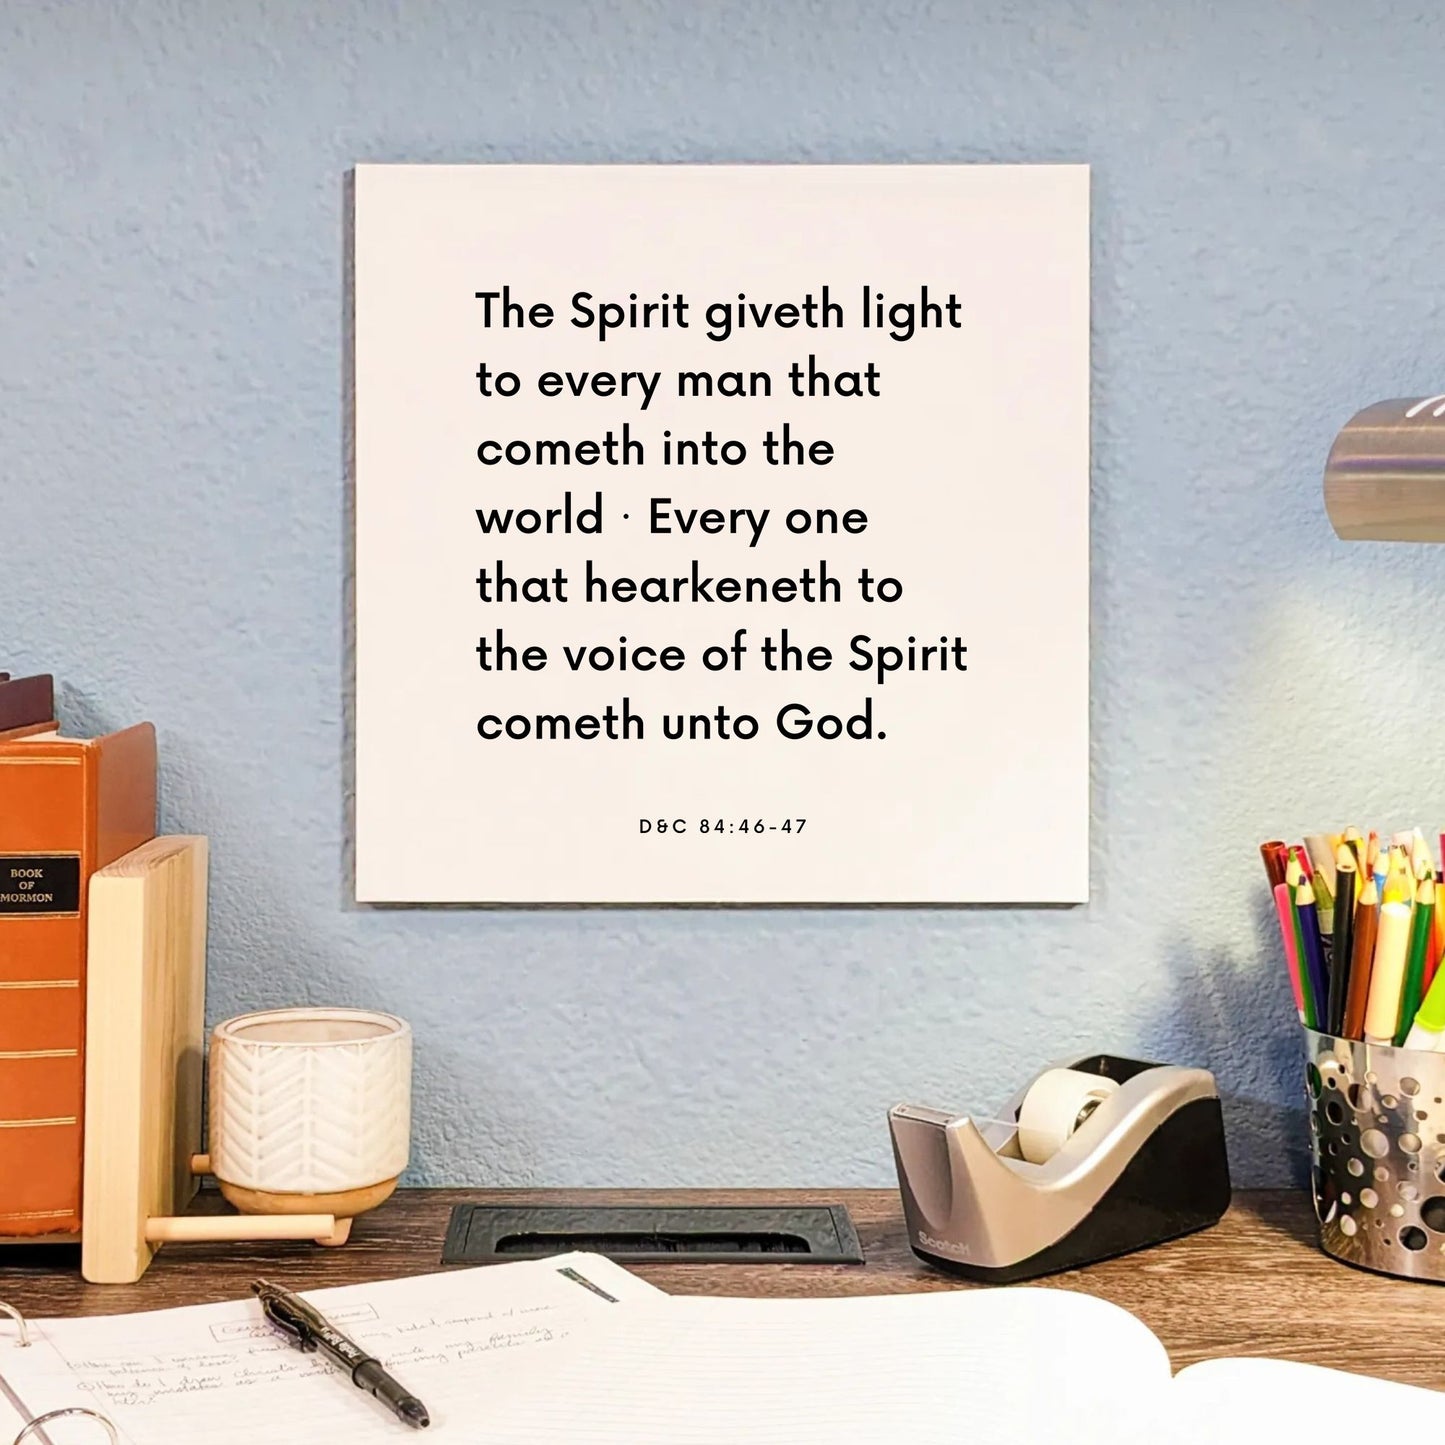 Desk mouting of the scripture tile for D&C 84:46-47 - "The Spirit giveth light to every man"